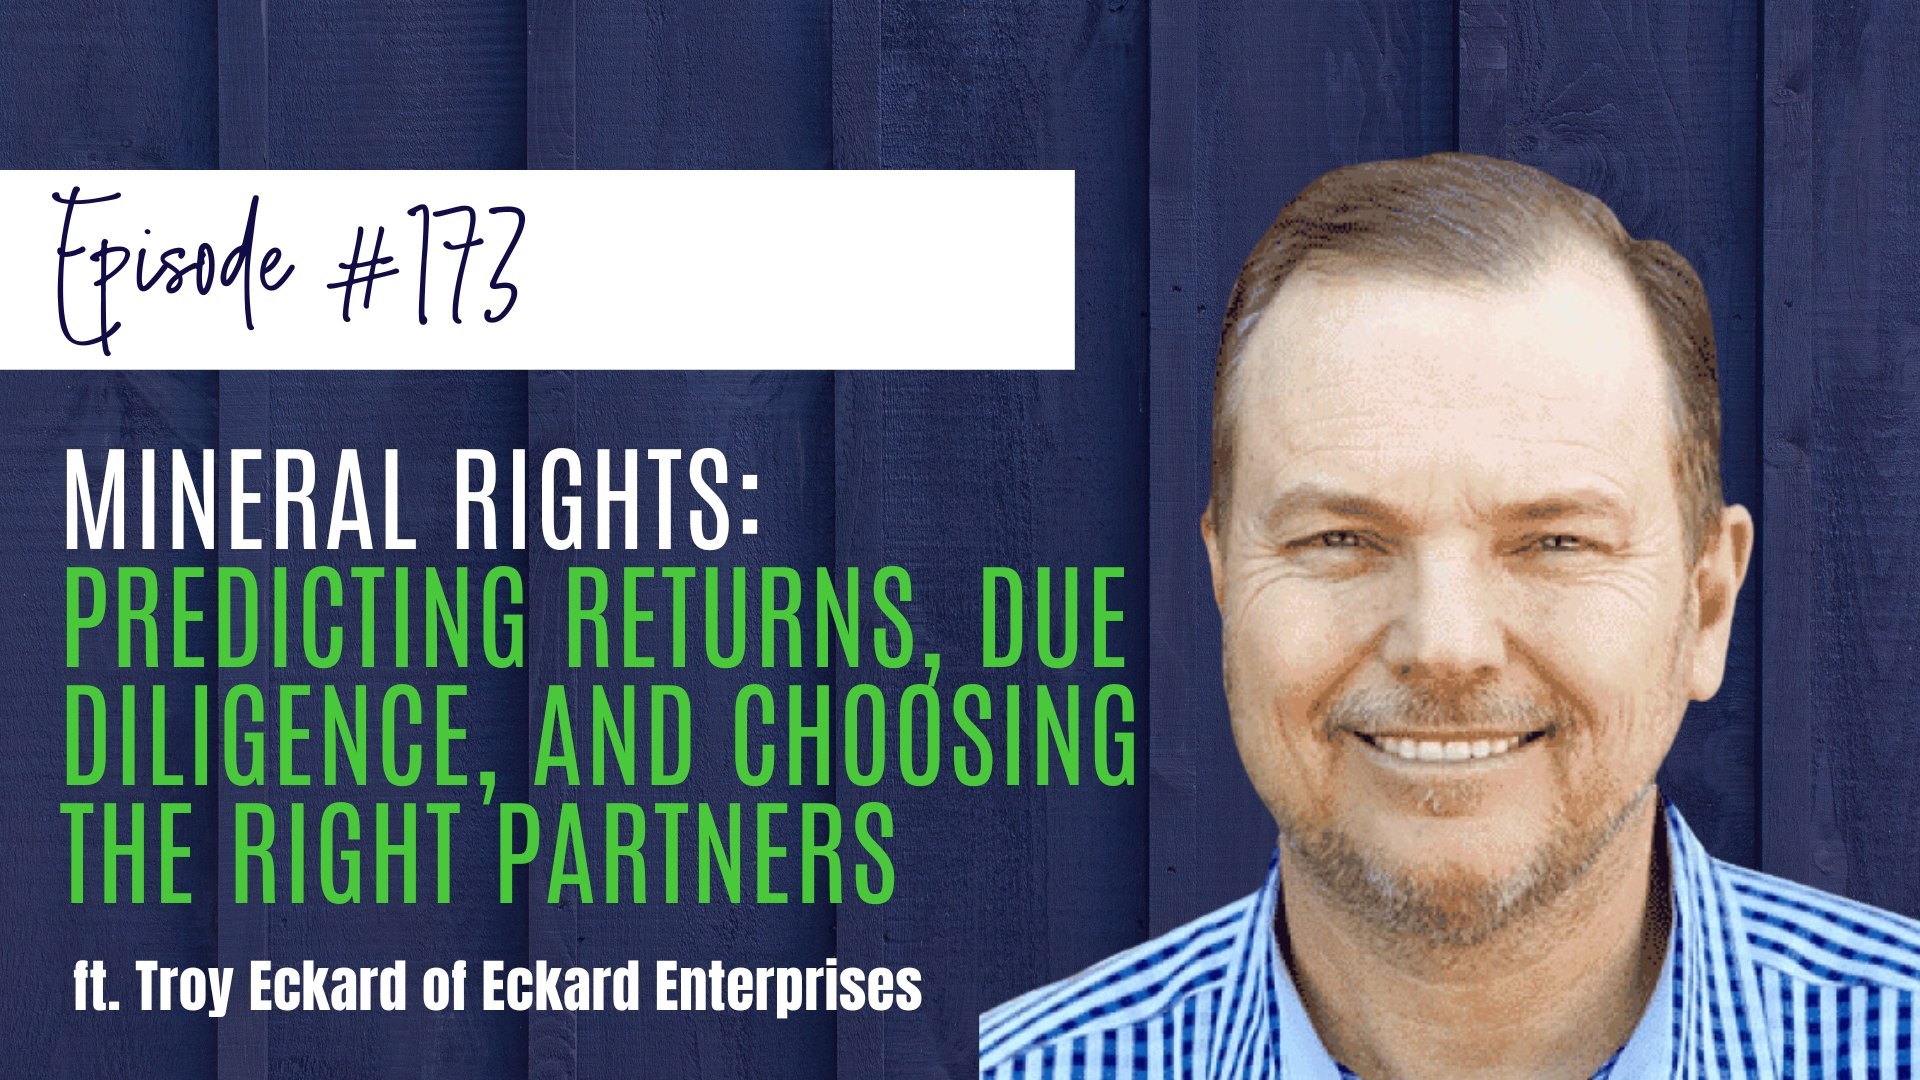 #173 Mineral Rights: Predicting Returns, Due Diligence, and Choosing the Right Partners, ft. Troy Eckard